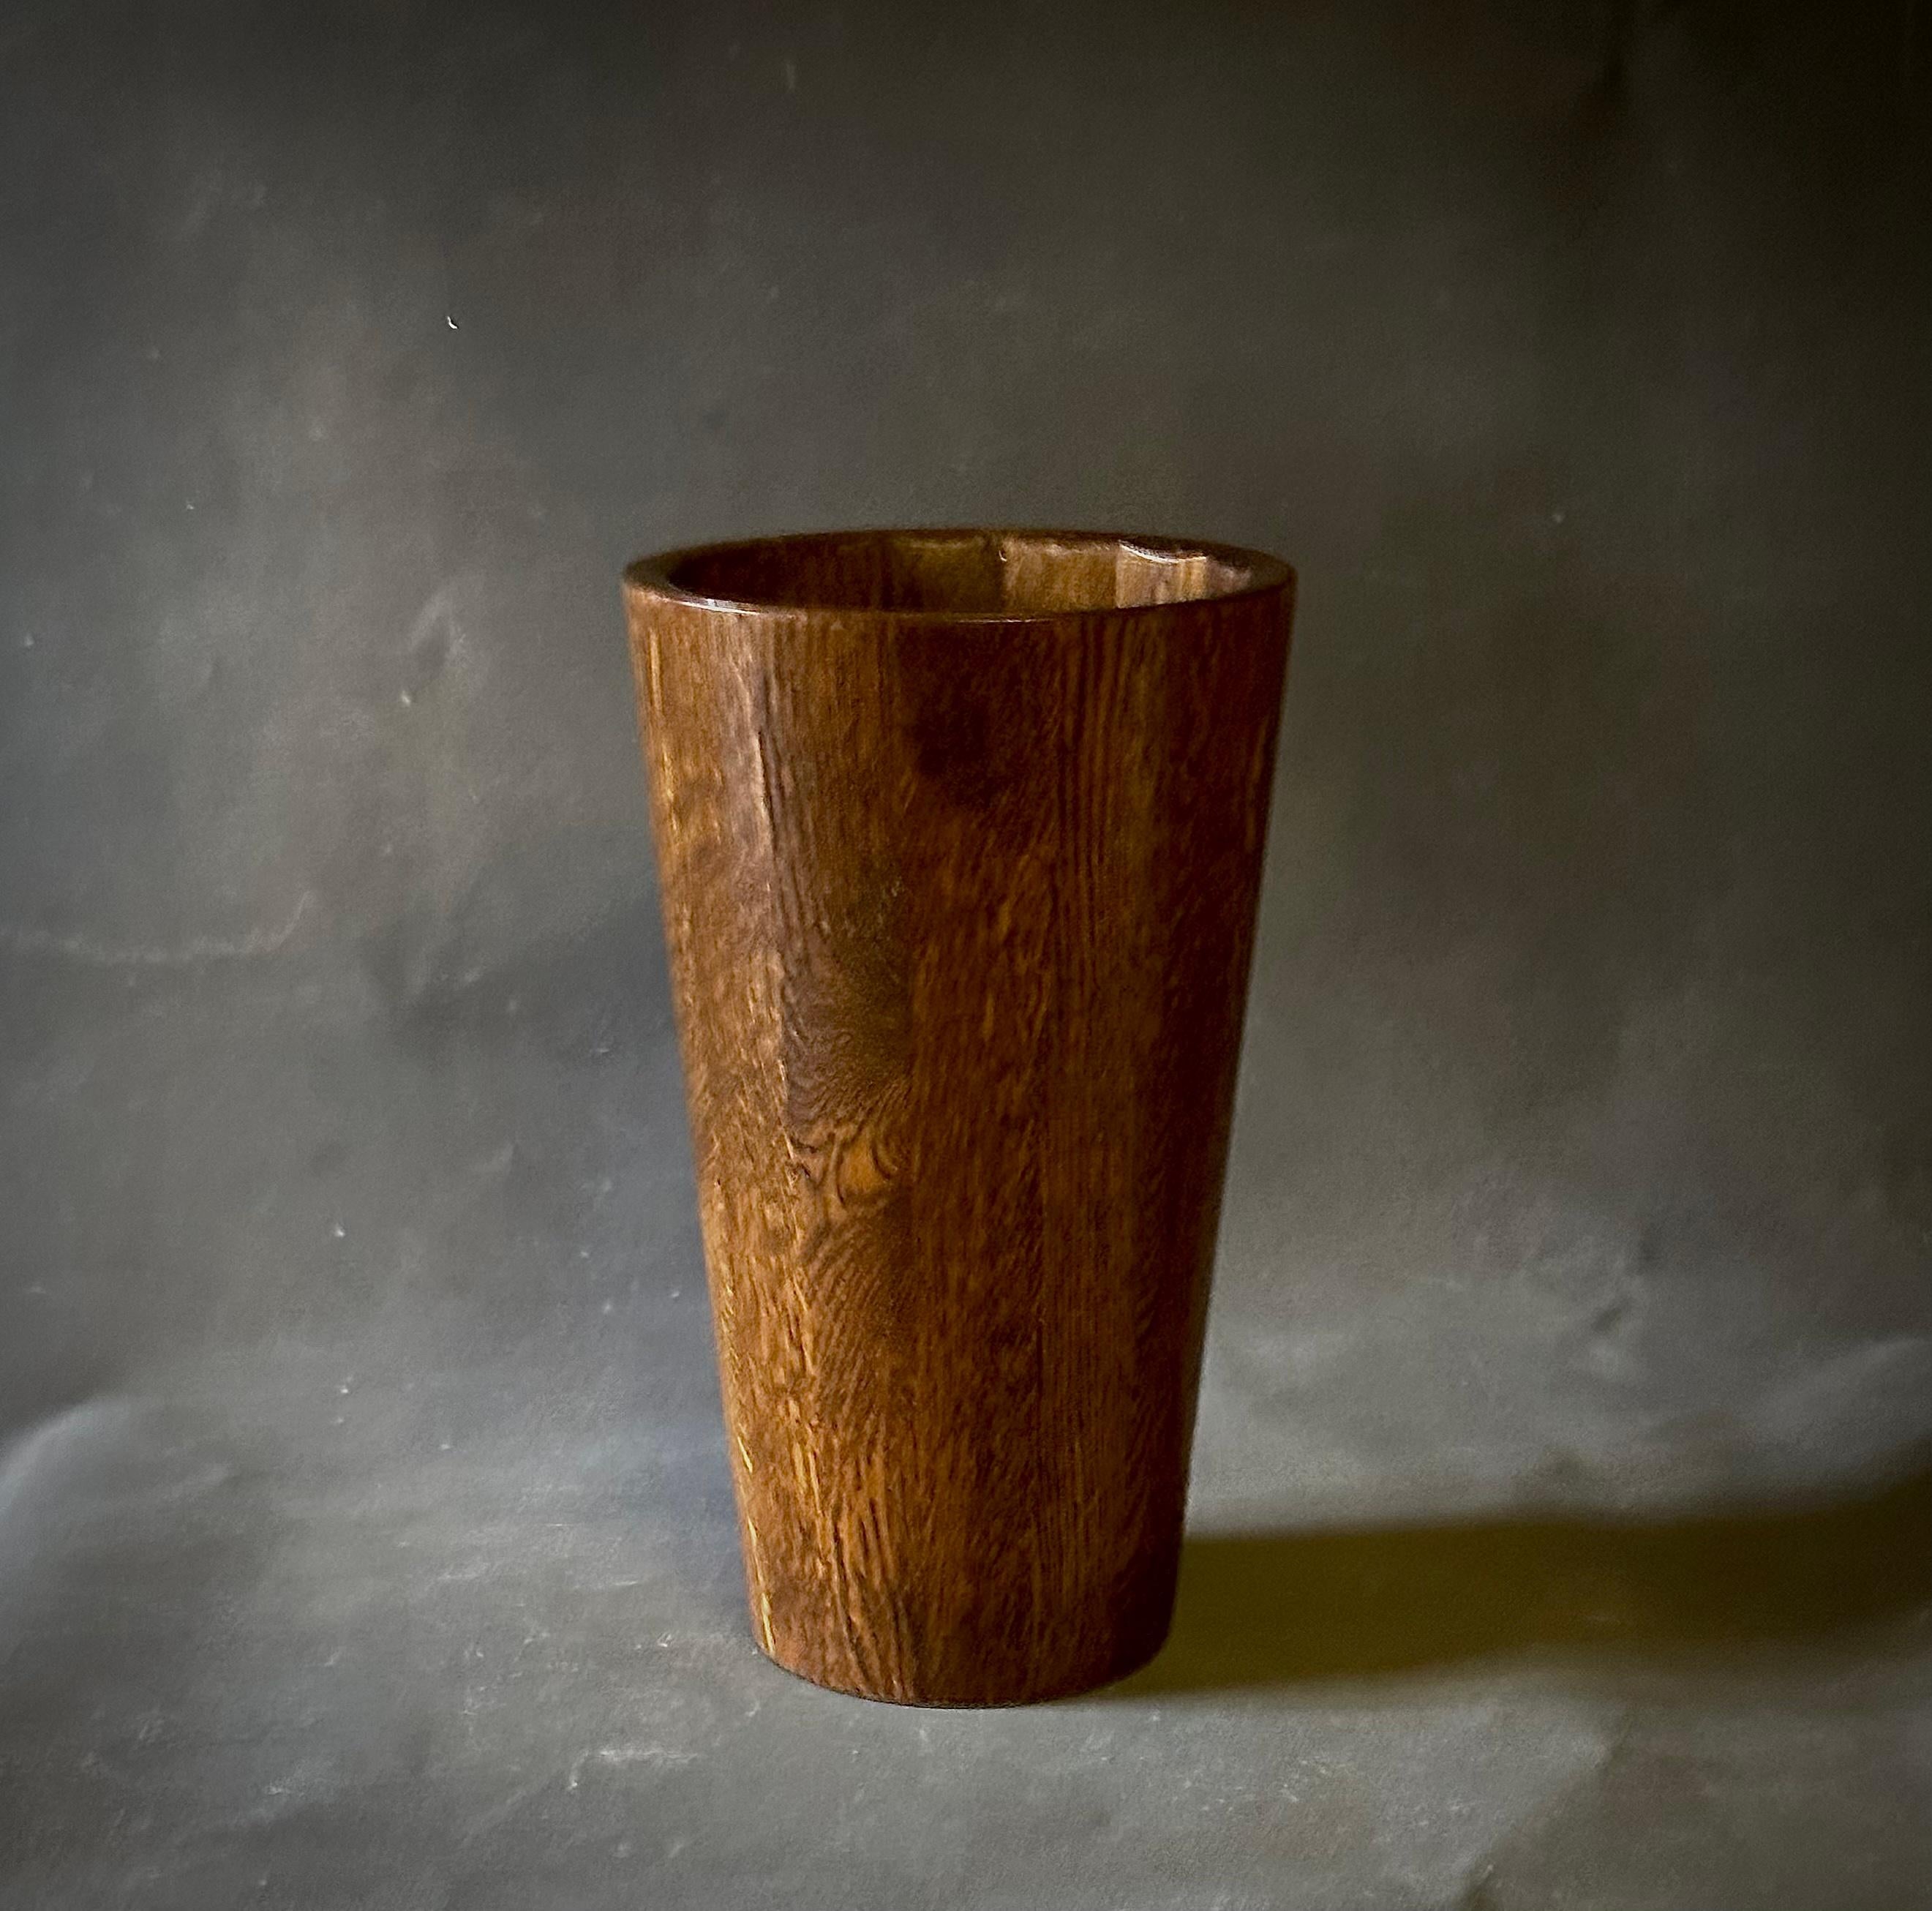 Belgian mid-century wooden umbrella stand or waste bin with a simple, cylindrical shape. Warm and understated.

Belgium, circa 1940.

Dimensions: 11 W x 11 D x 18 H.